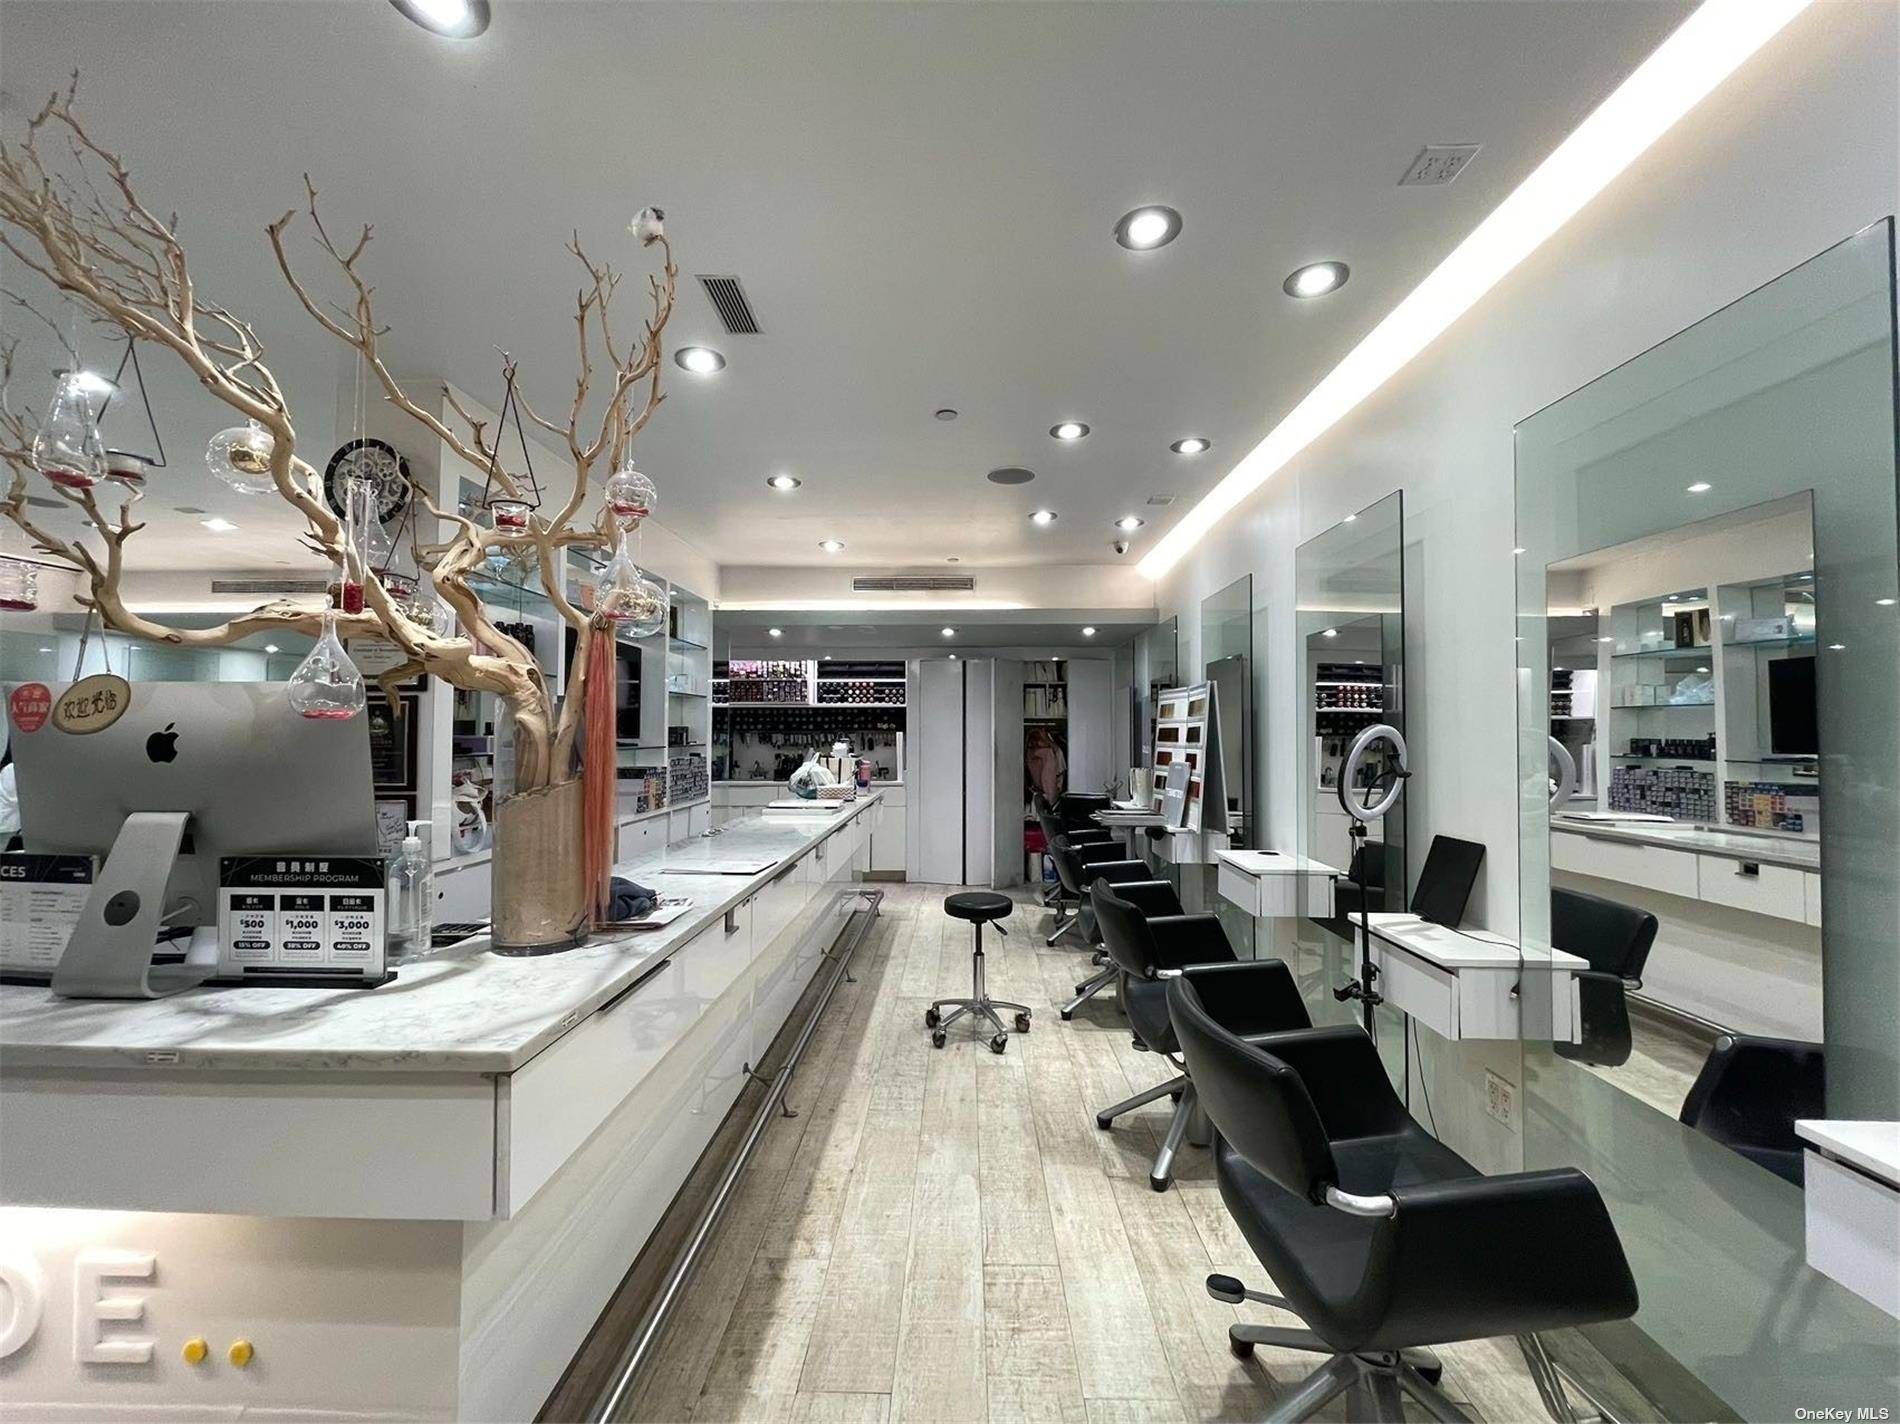 hair salon business for sale at the heart of Flushing, a busy area, great opportunity, great location.